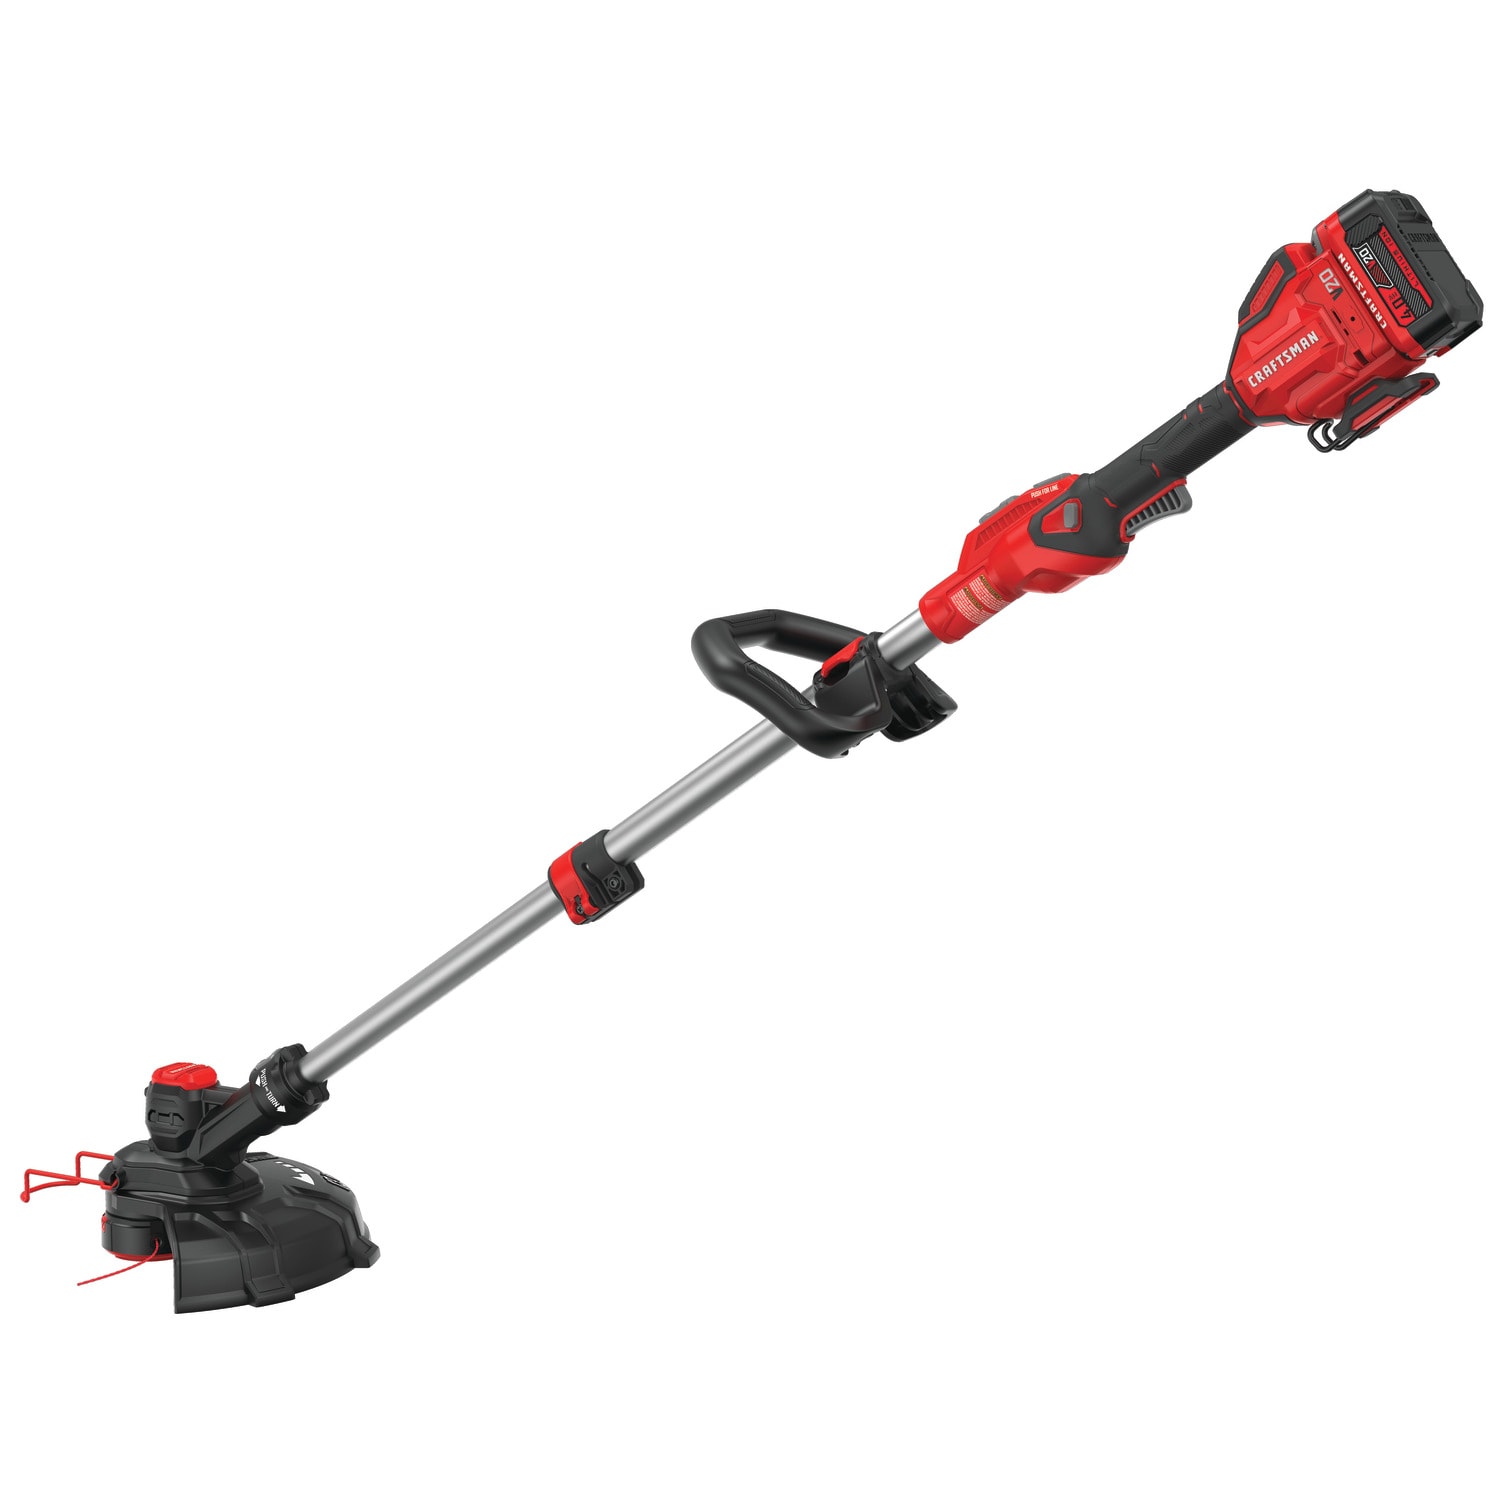  CRAFTSMAN CMCST900D1 V20* Cordless WEEDWACKER® String Trimmer/Edger  - Automatic Line Advance Feed with CMZST0653 3 pack .065 inch string trimmer  spools : Everything Else